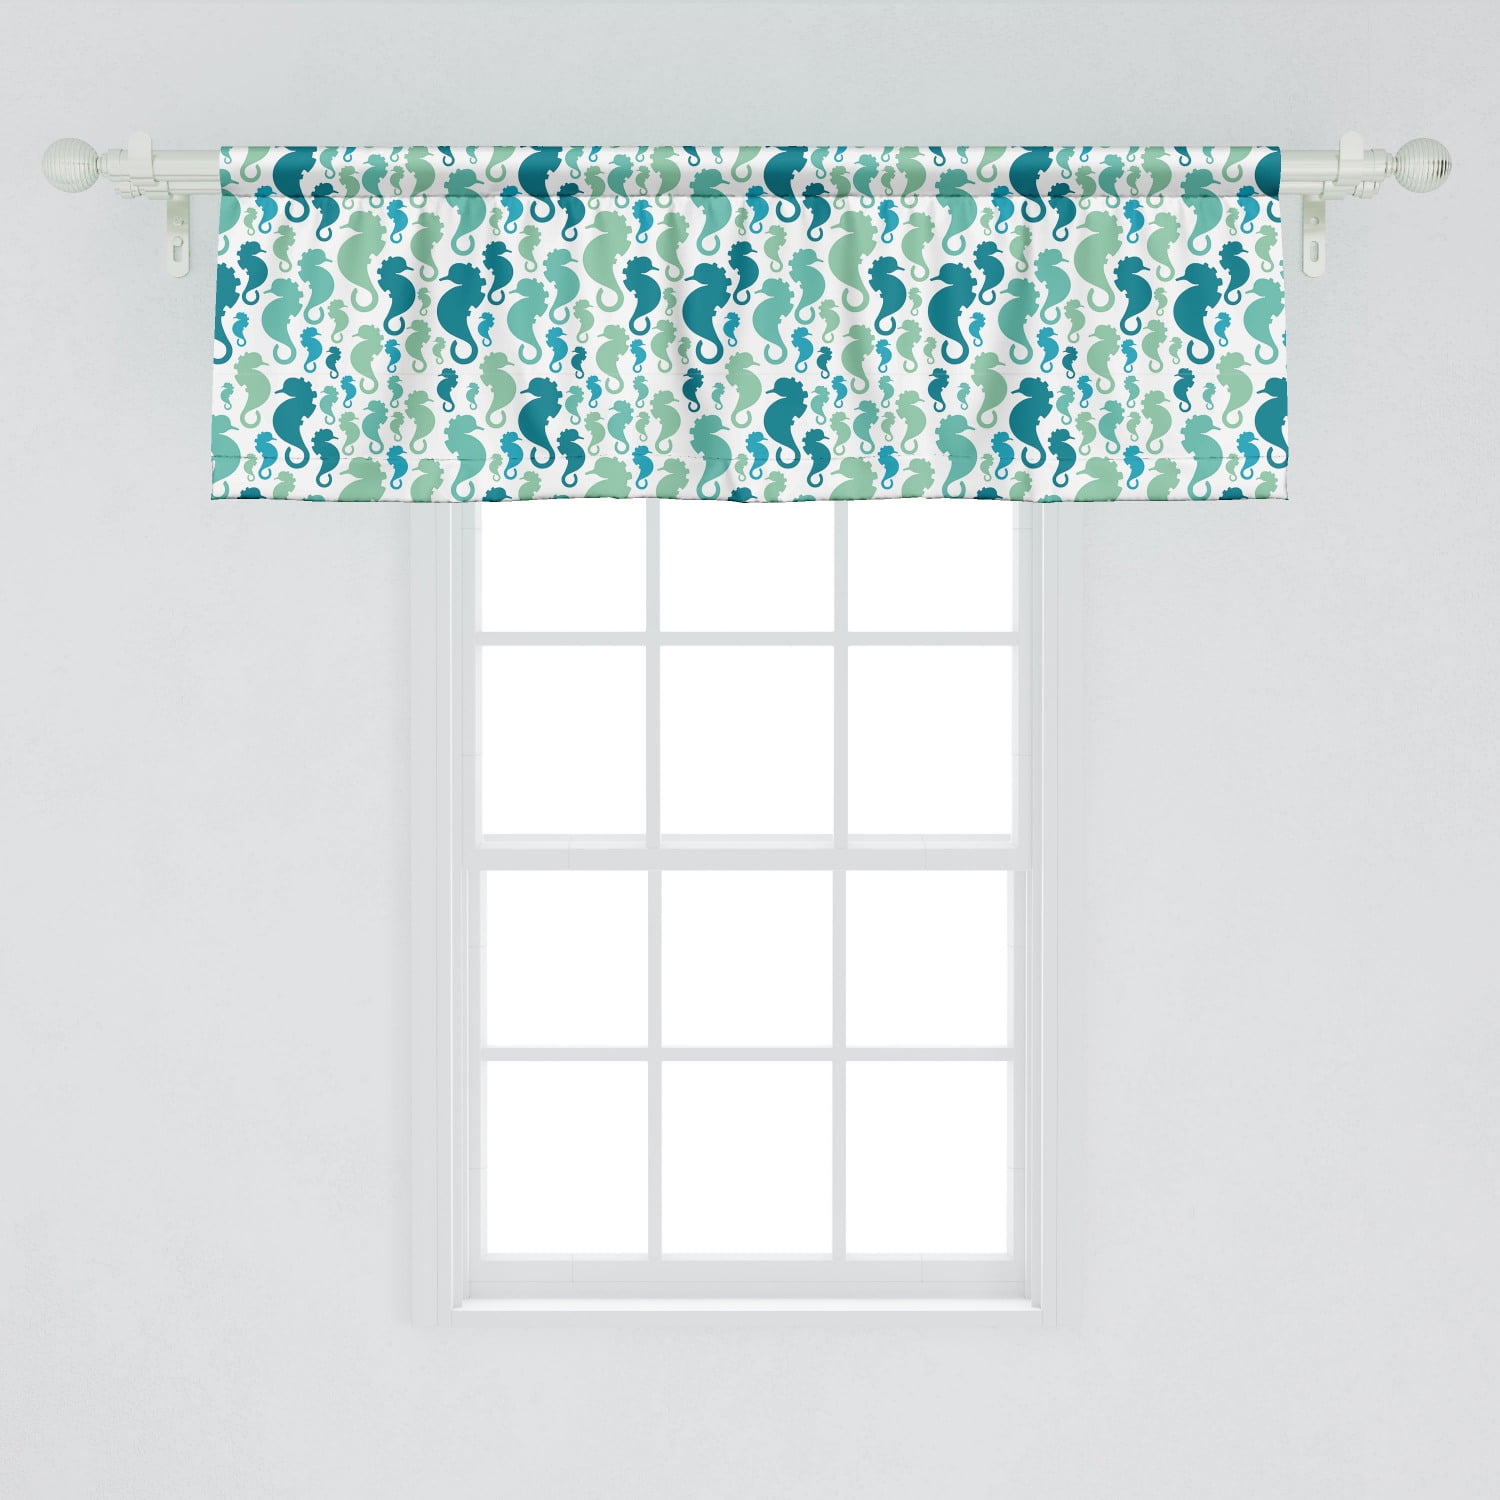 Ambesonne Seahorse Window Valance, Silhouette Sea Horse Pattern on White  Background, Curtain Valance for Kitchen Bedroom Decor with Rod Pocket, 20